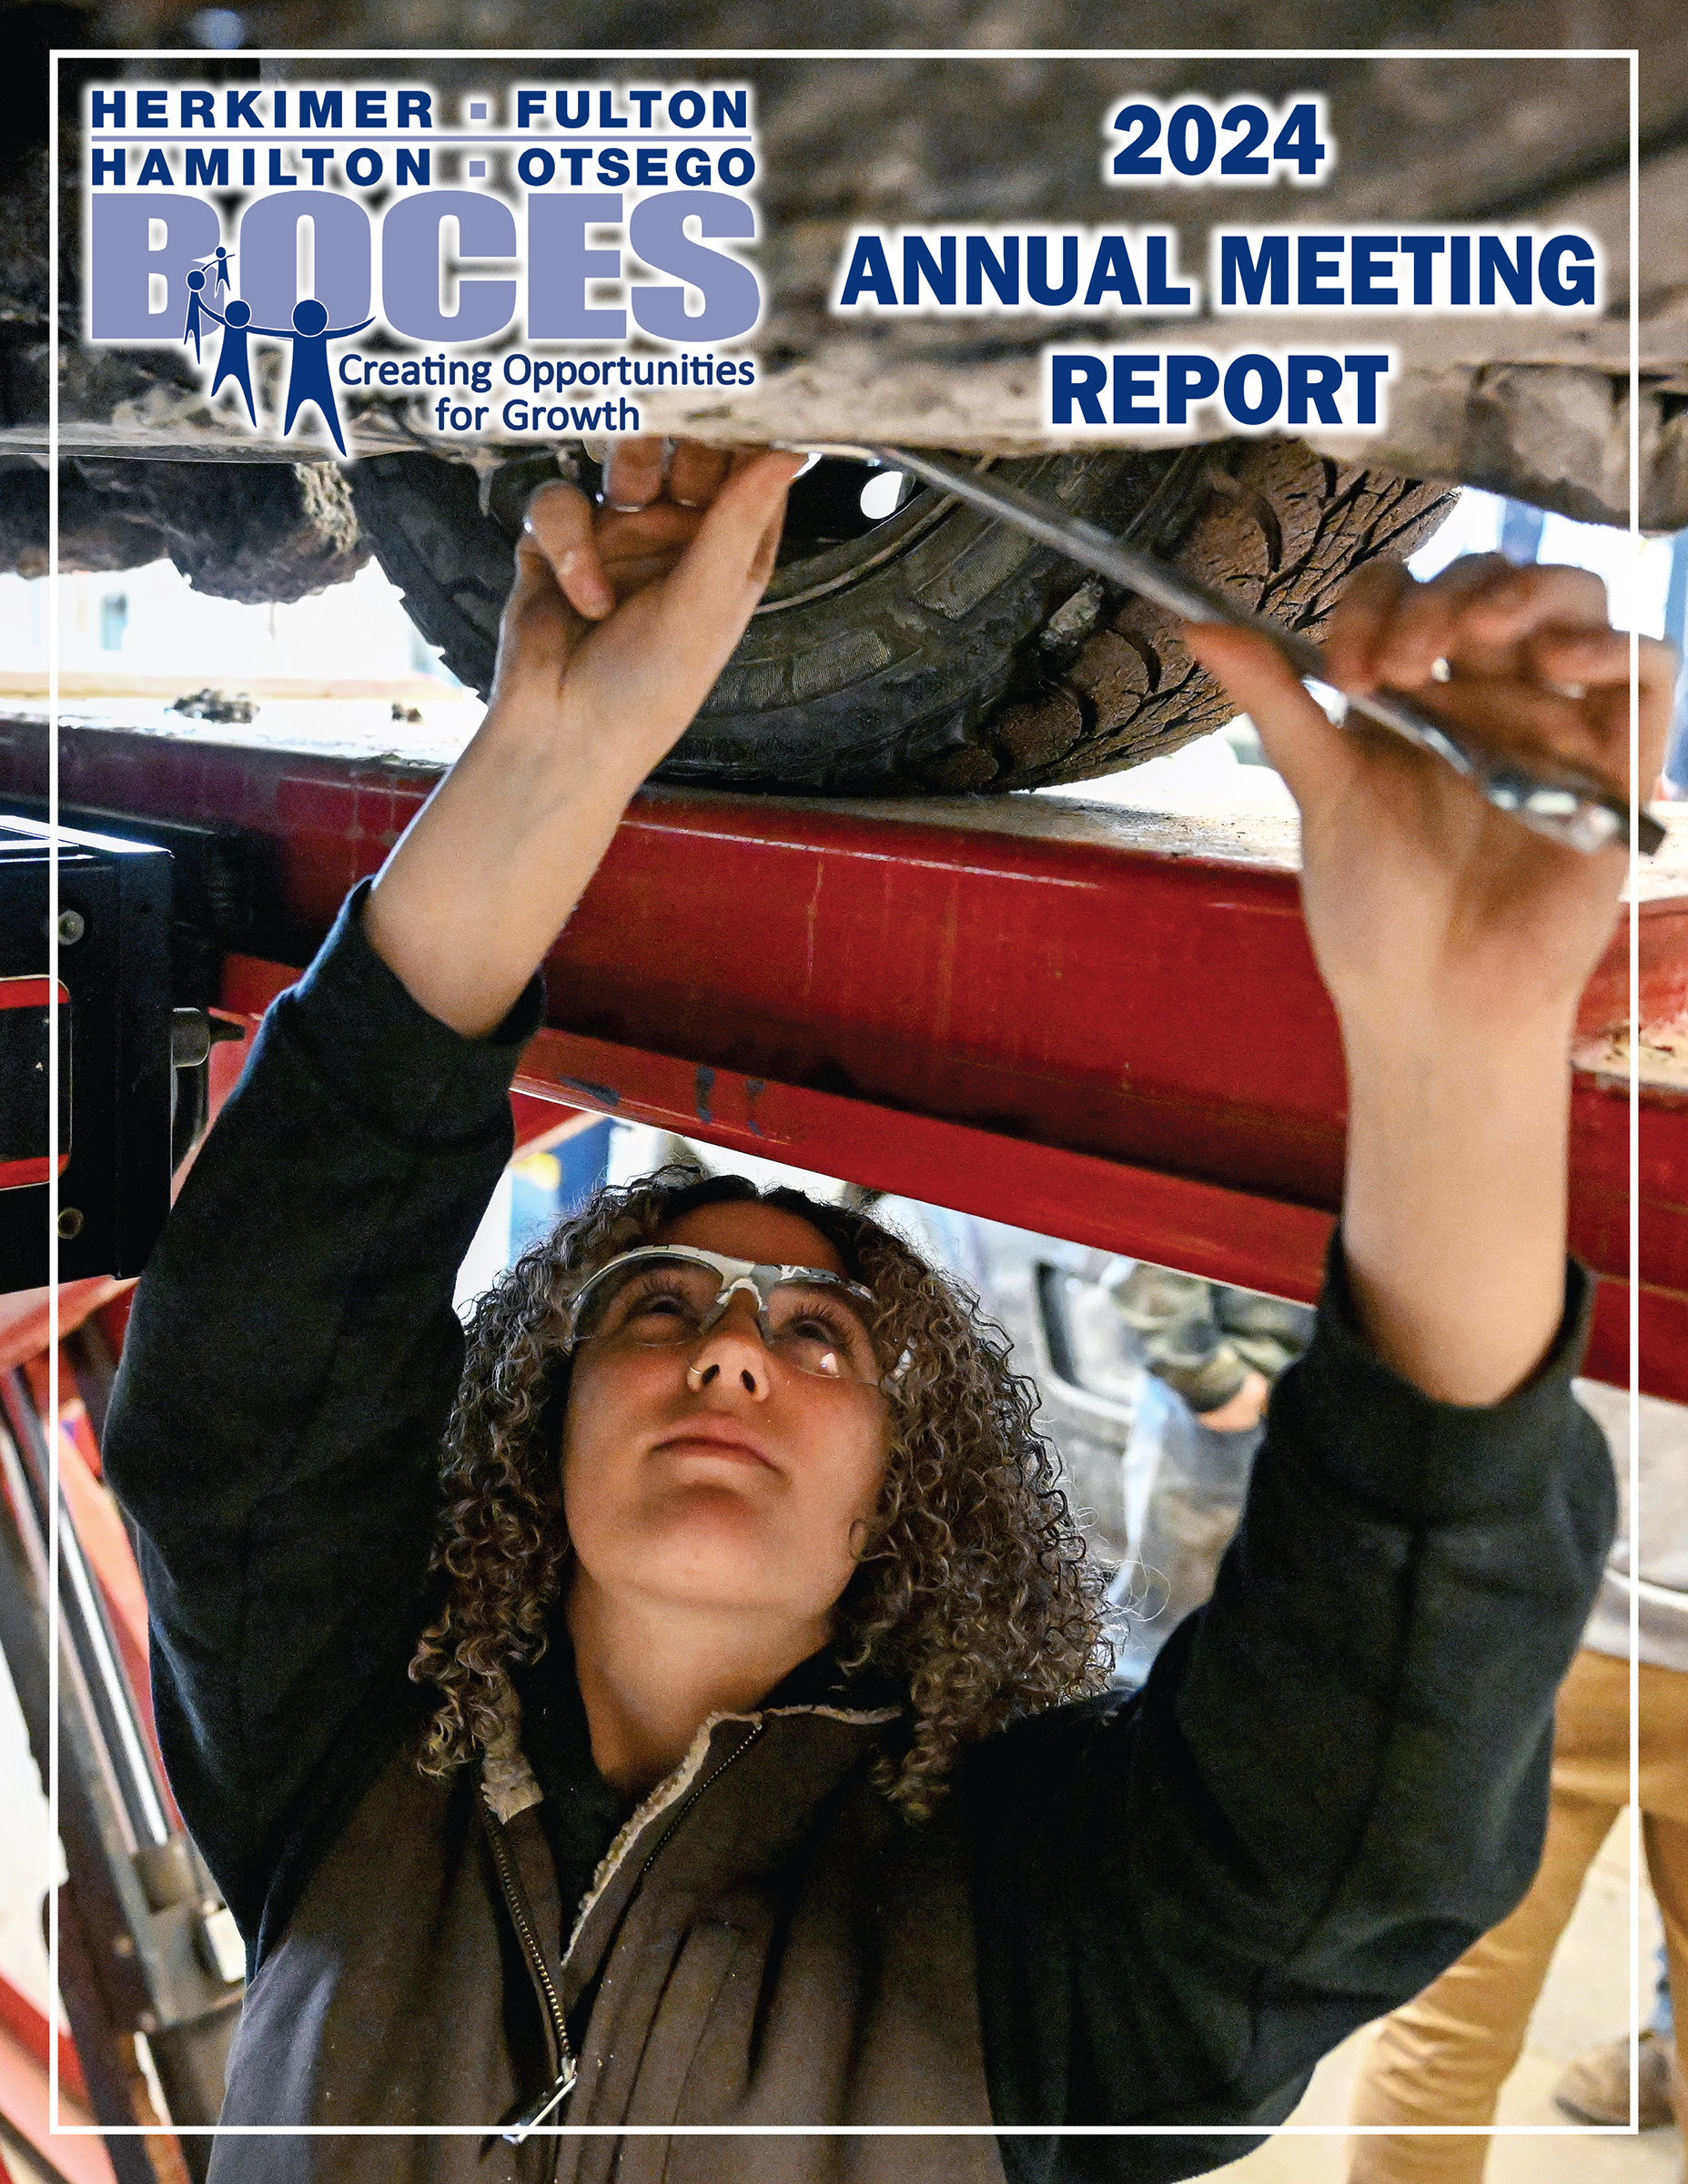 Herkimer BOCES 2024 Annual Meeting Report Cover with student working on a car